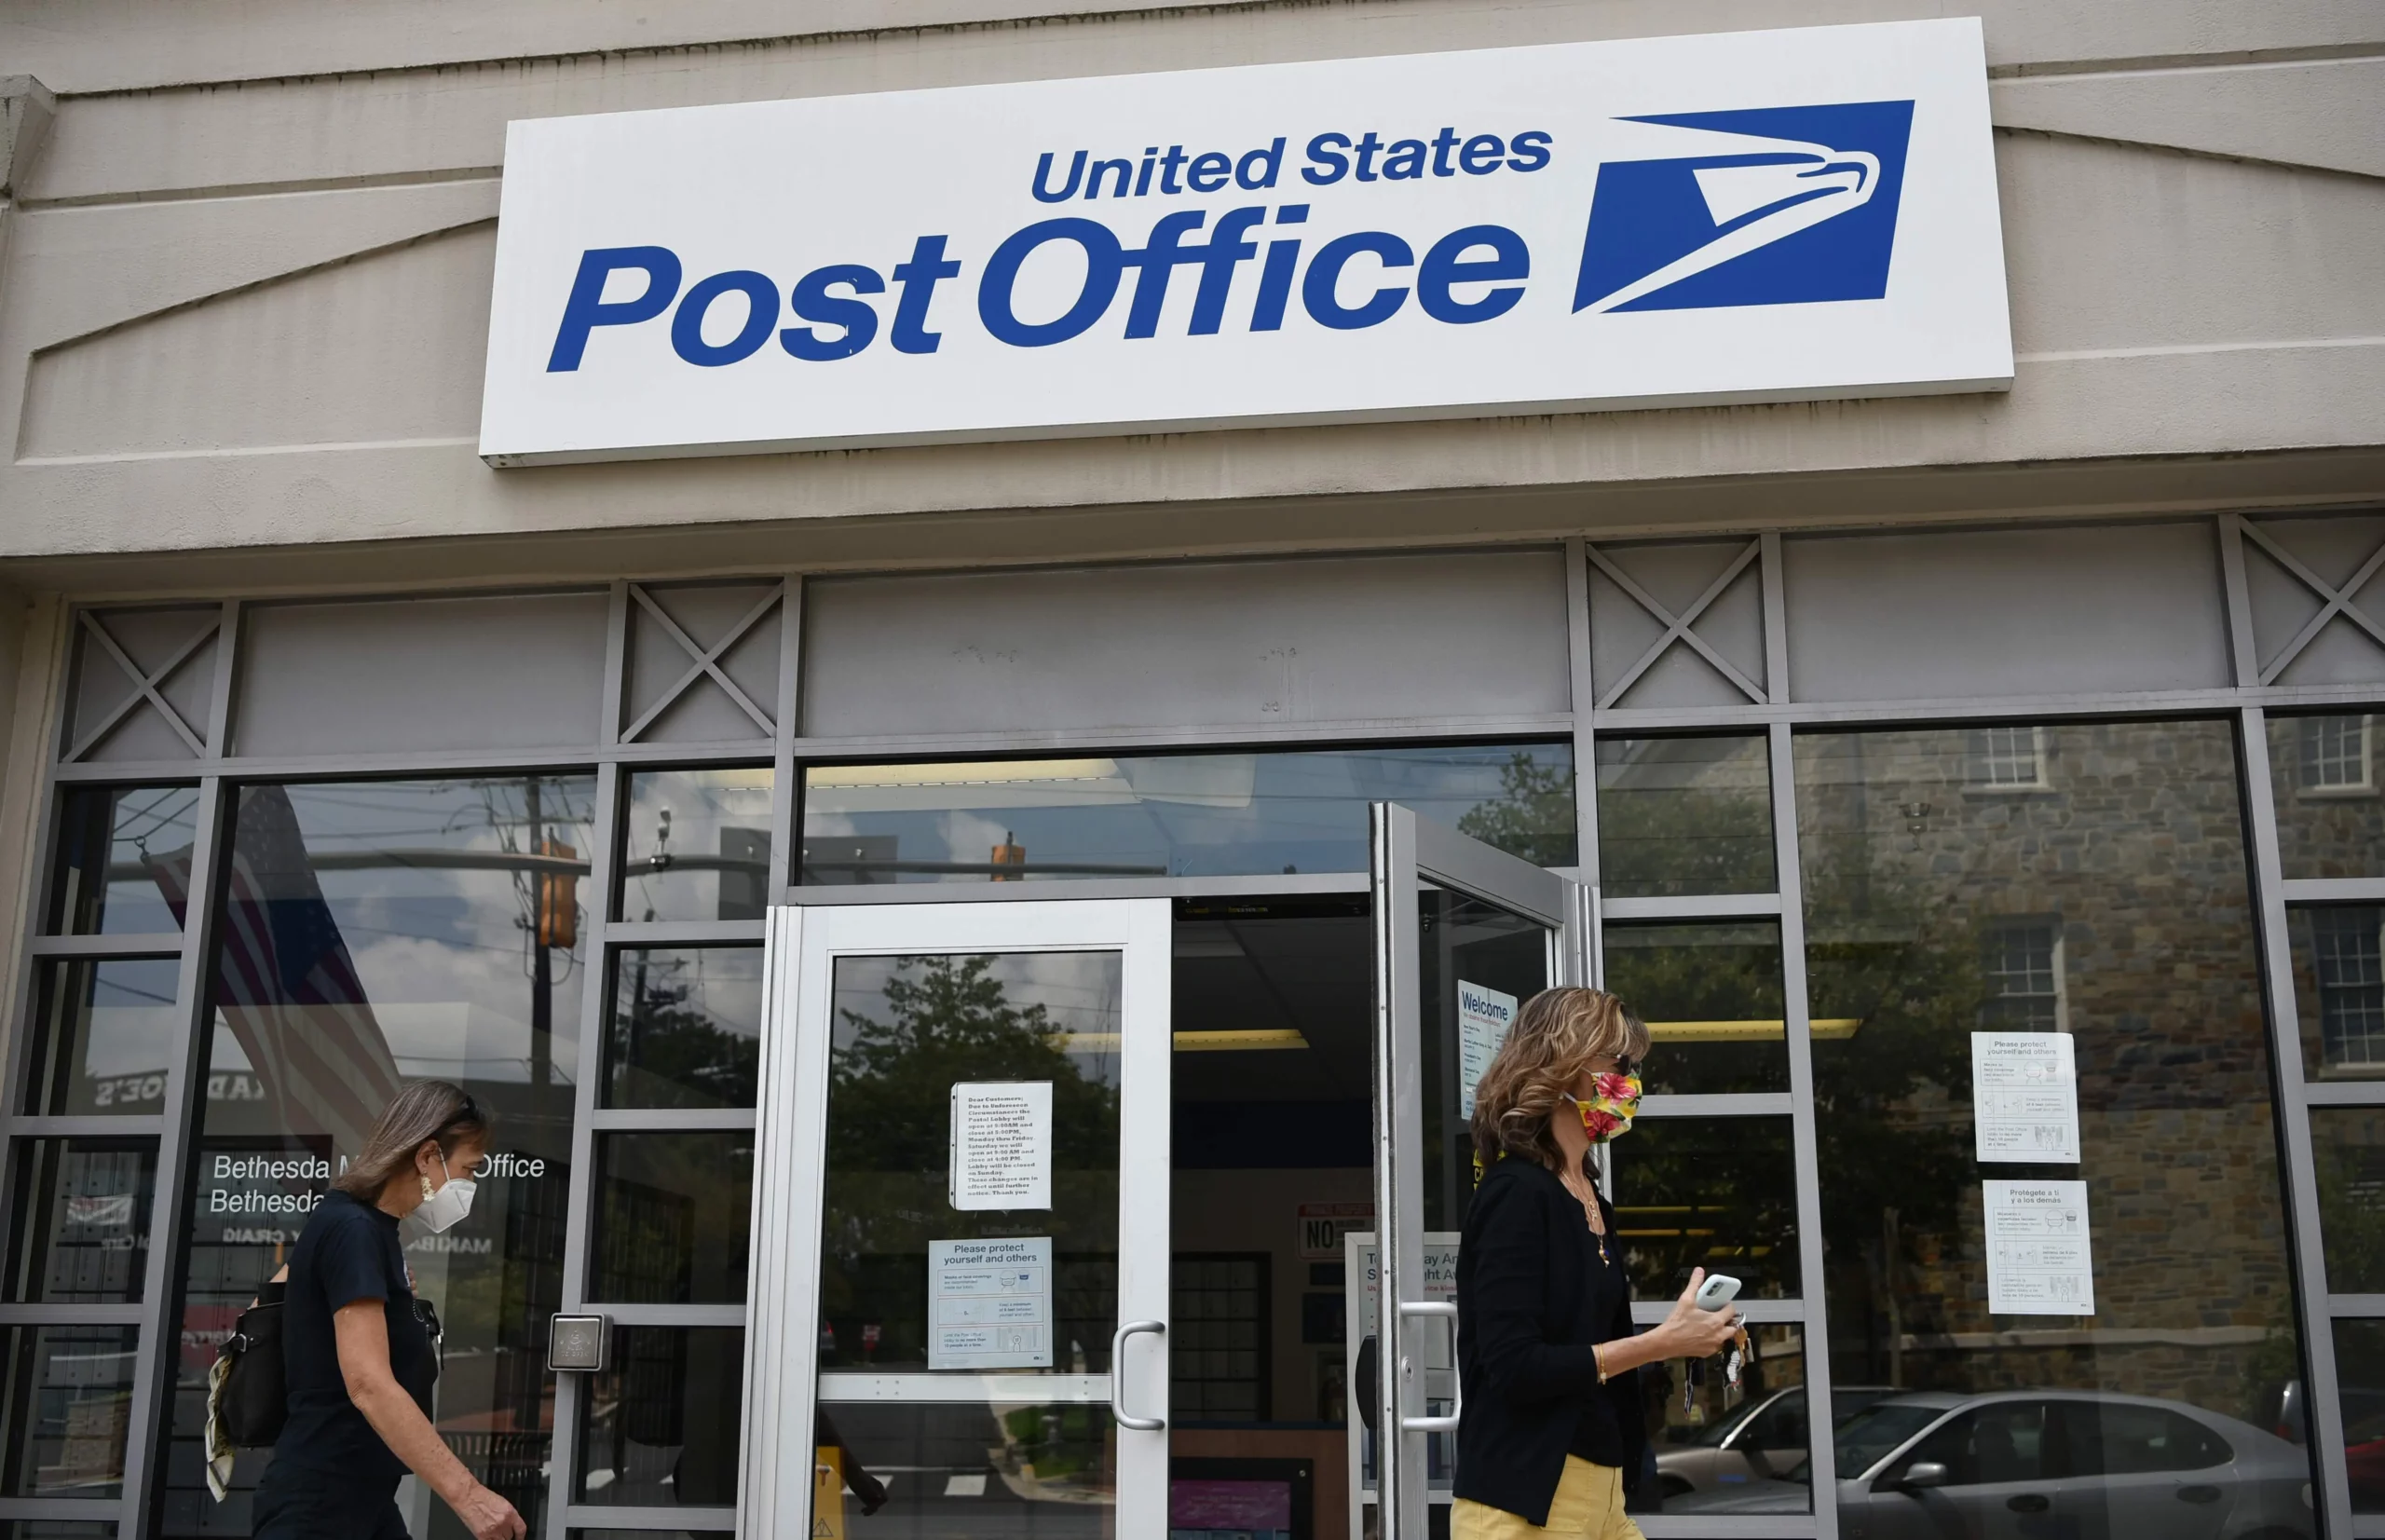 Are post offices open today?